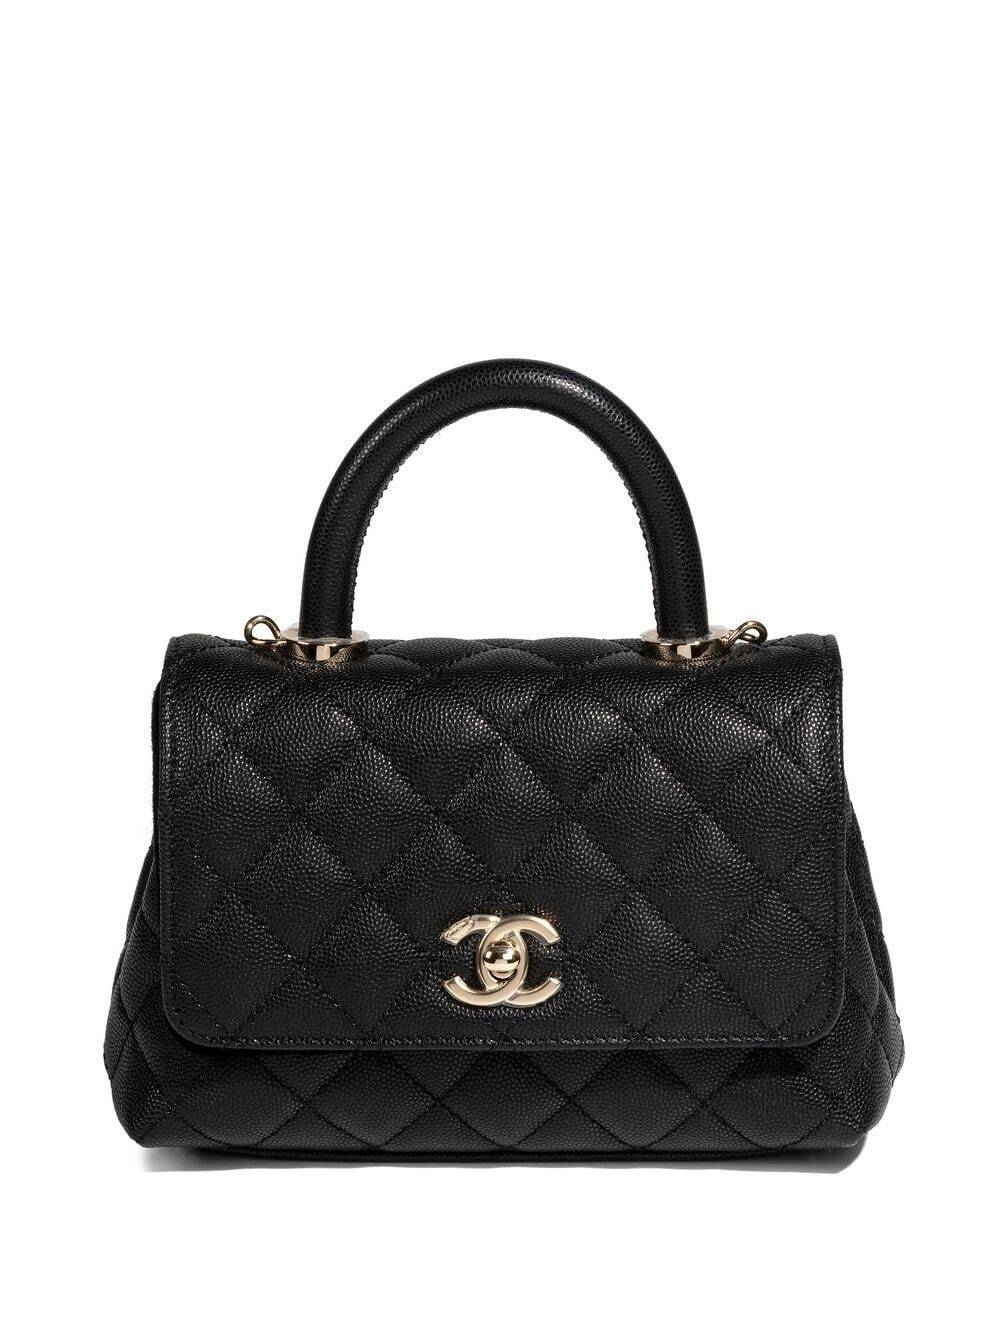 Chanel Pre-Owned diamond-quilted tote bag - Black